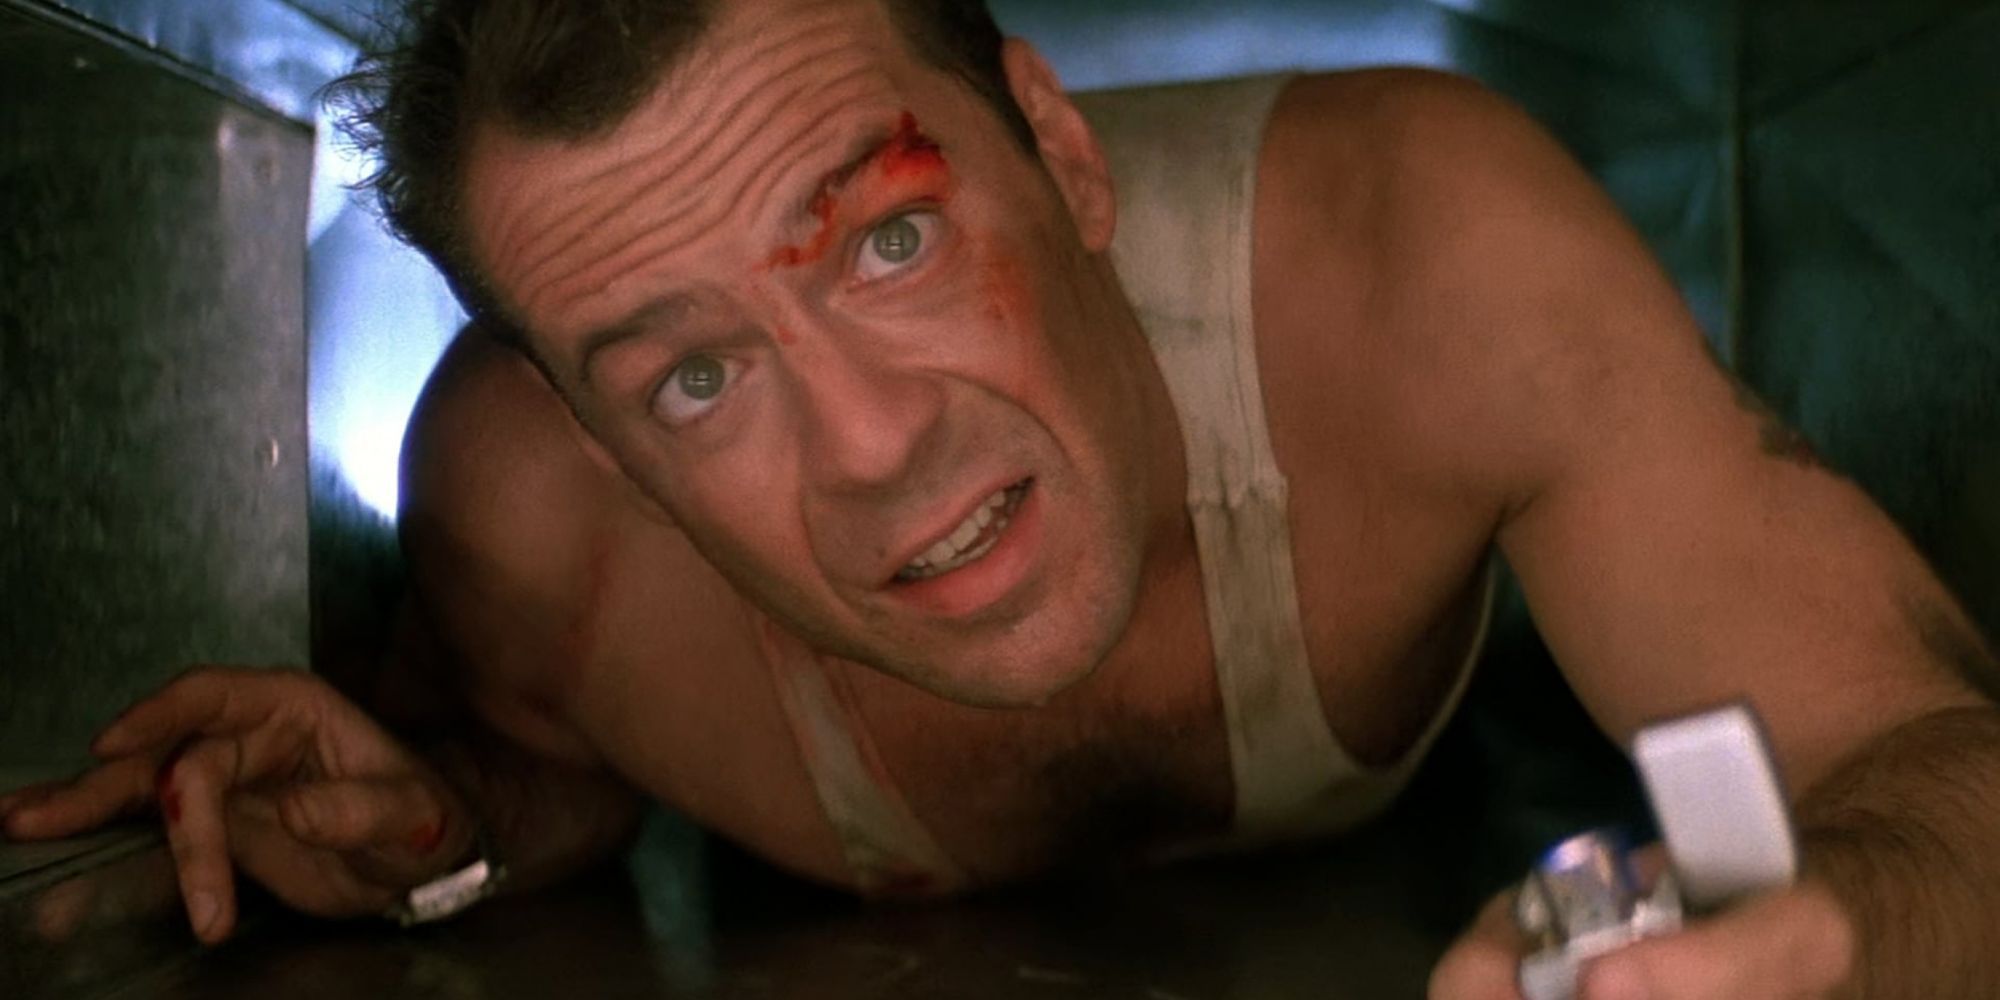 Bruce Willis was crawling through a vent with a lighter in hand